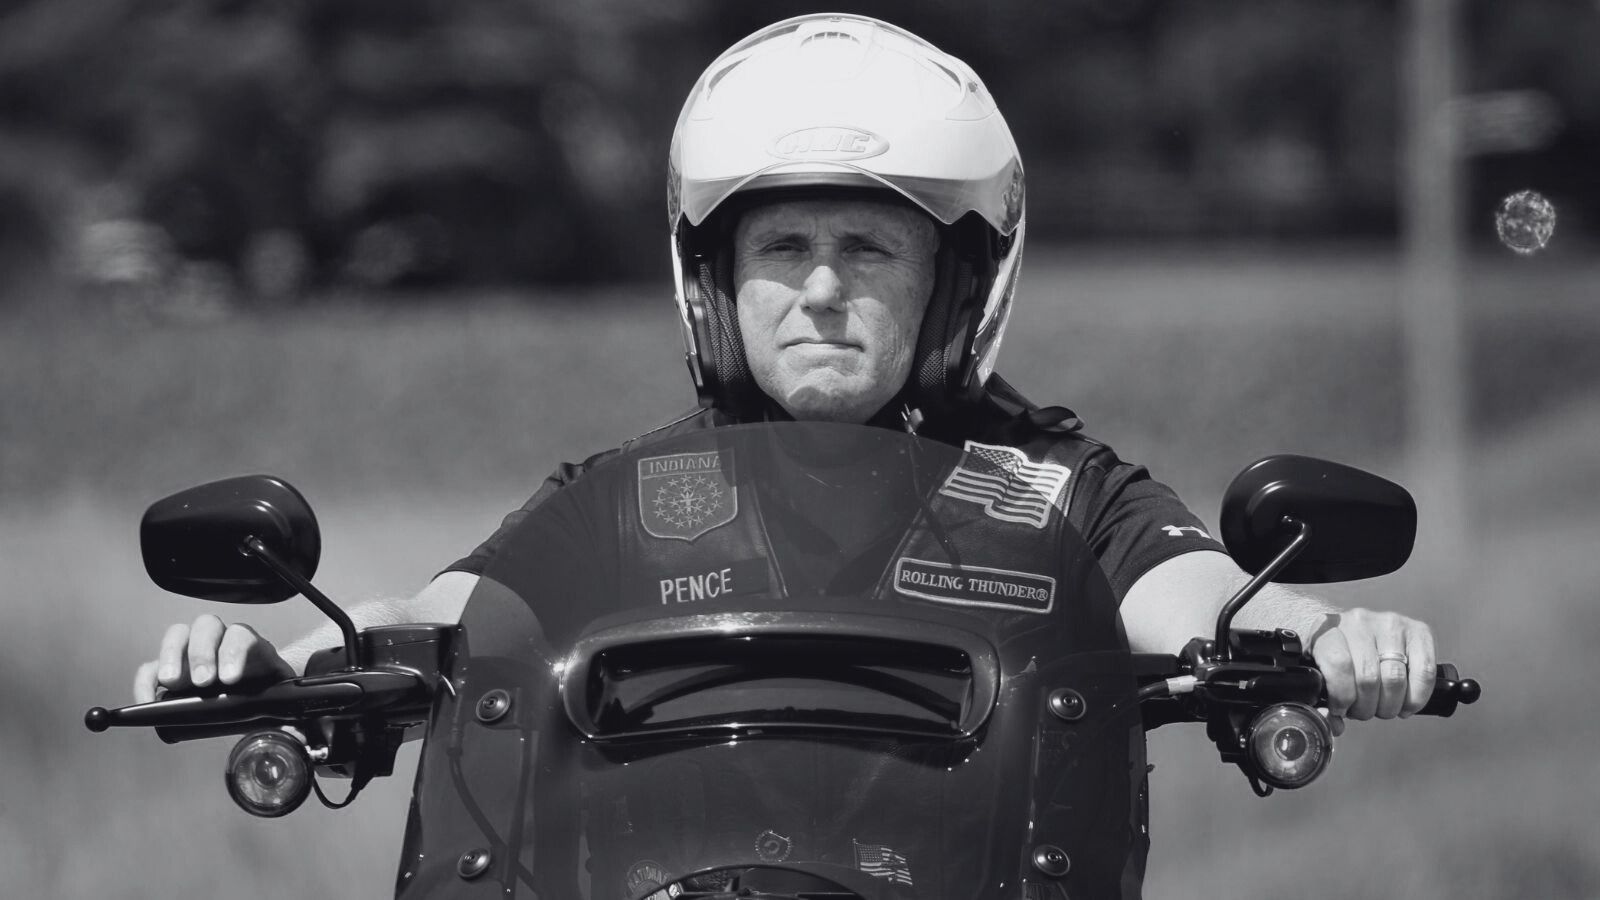 Former Vice President Mike Pence on a motorcycle